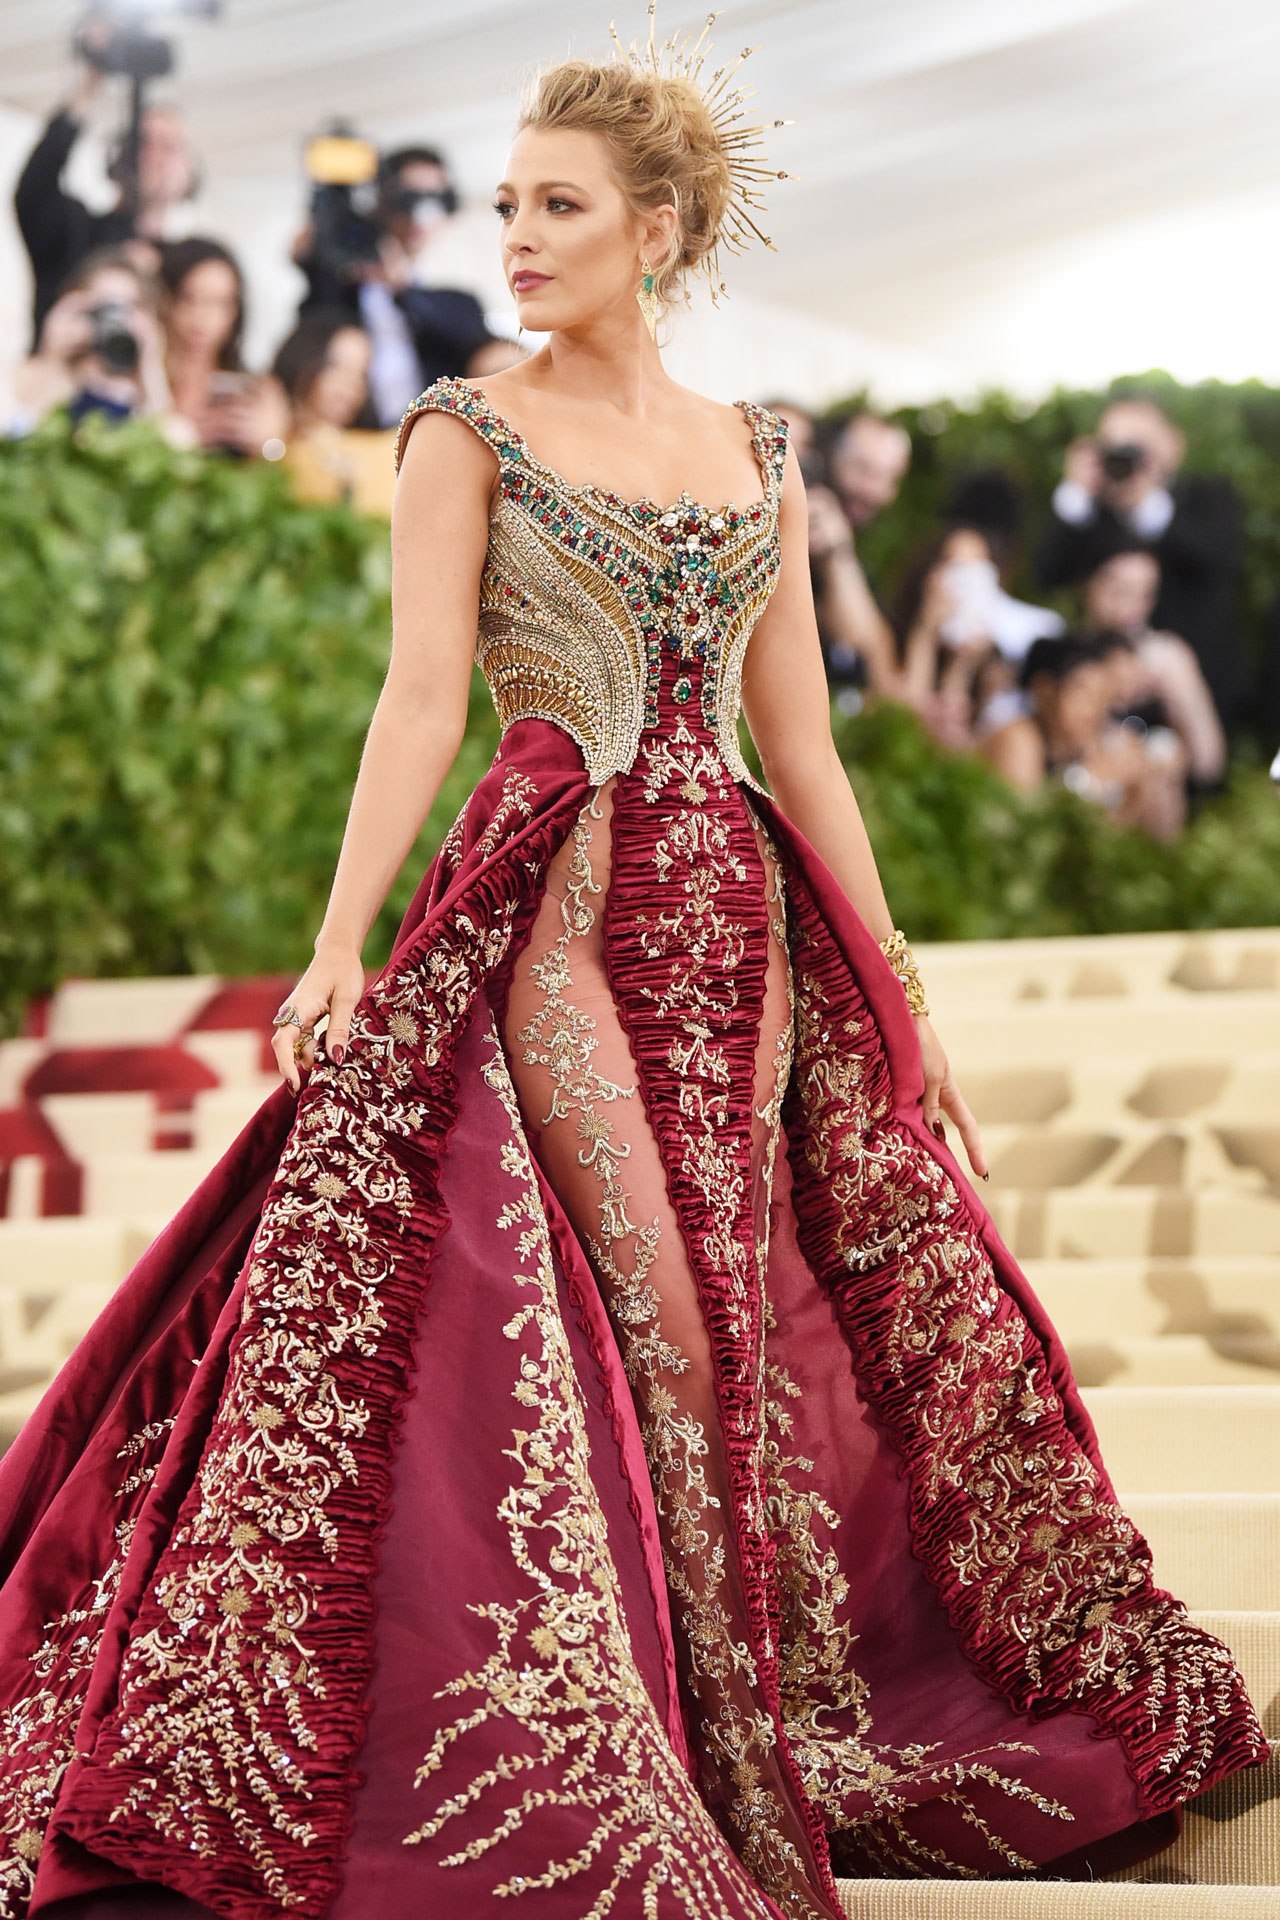 Met Gala 2019: It Was Business as Usual for Louis Vuitton - Go Fug Yourself